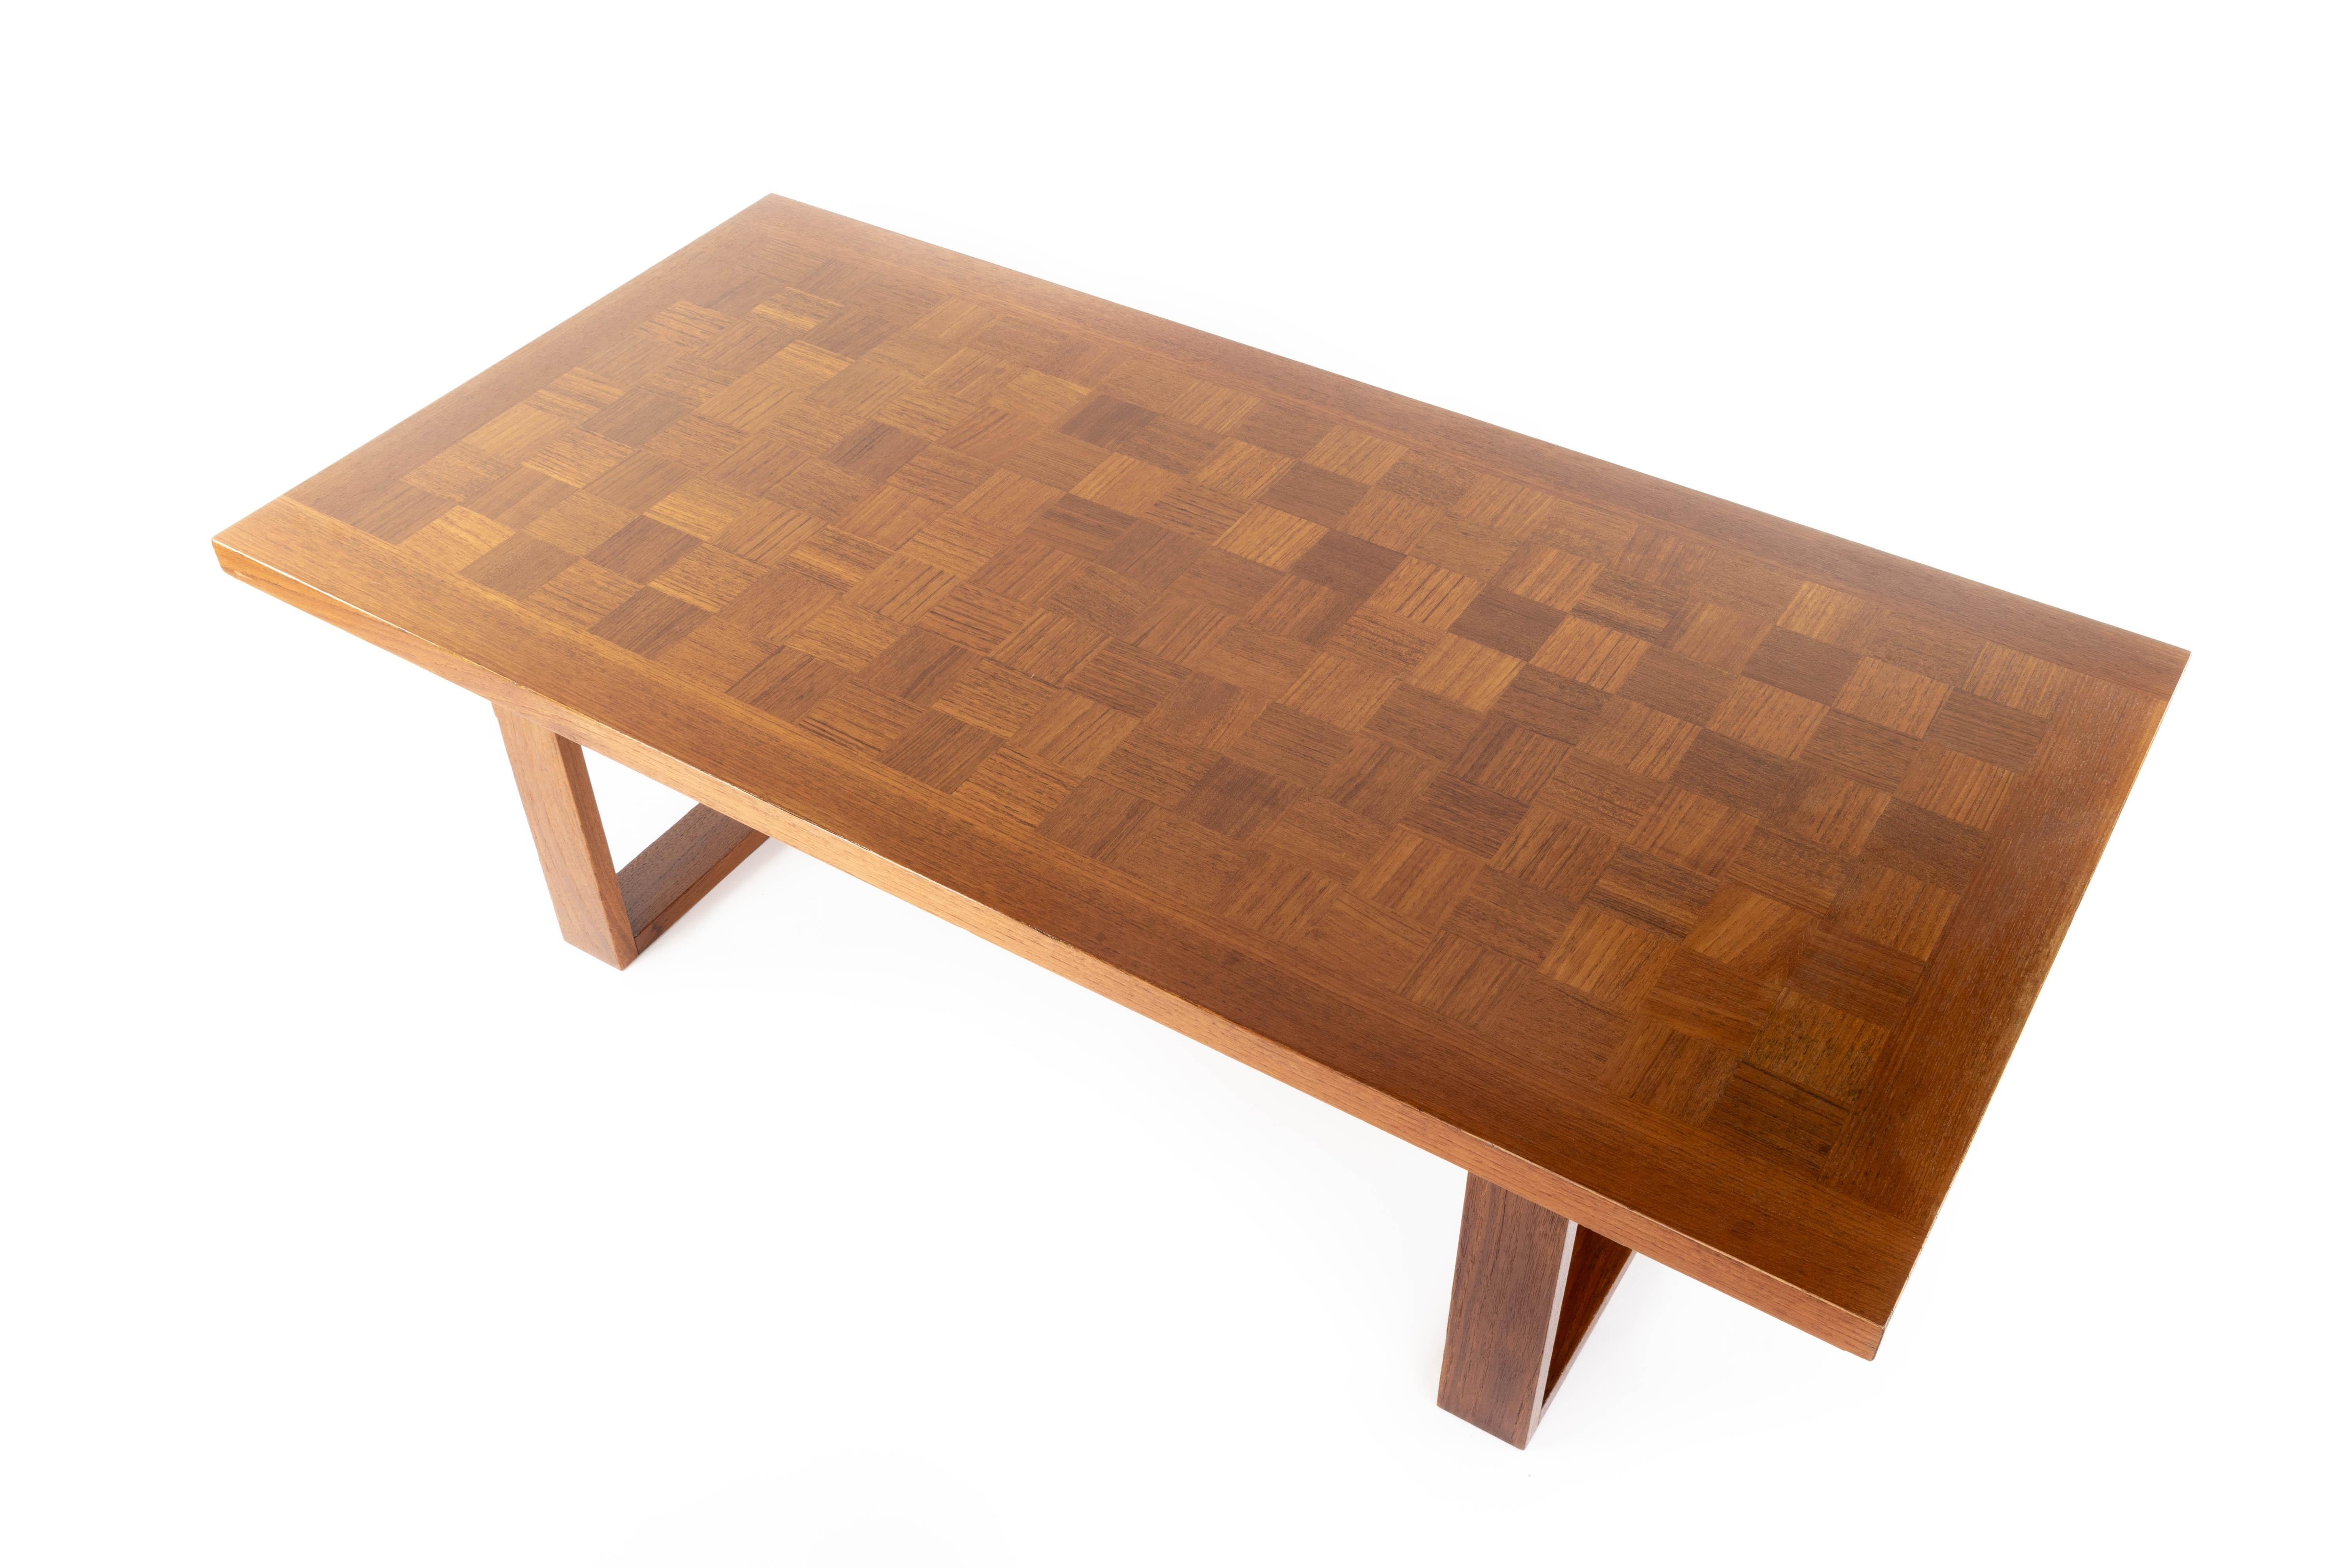 Large coffee table, sometimes called Boggie Woogie chess tables. This teak parquet table sit on two sled legs. Rectangular model
With its metallic label of the numbered and embedded mark on the back of the board.
Measurements:
Total height 40